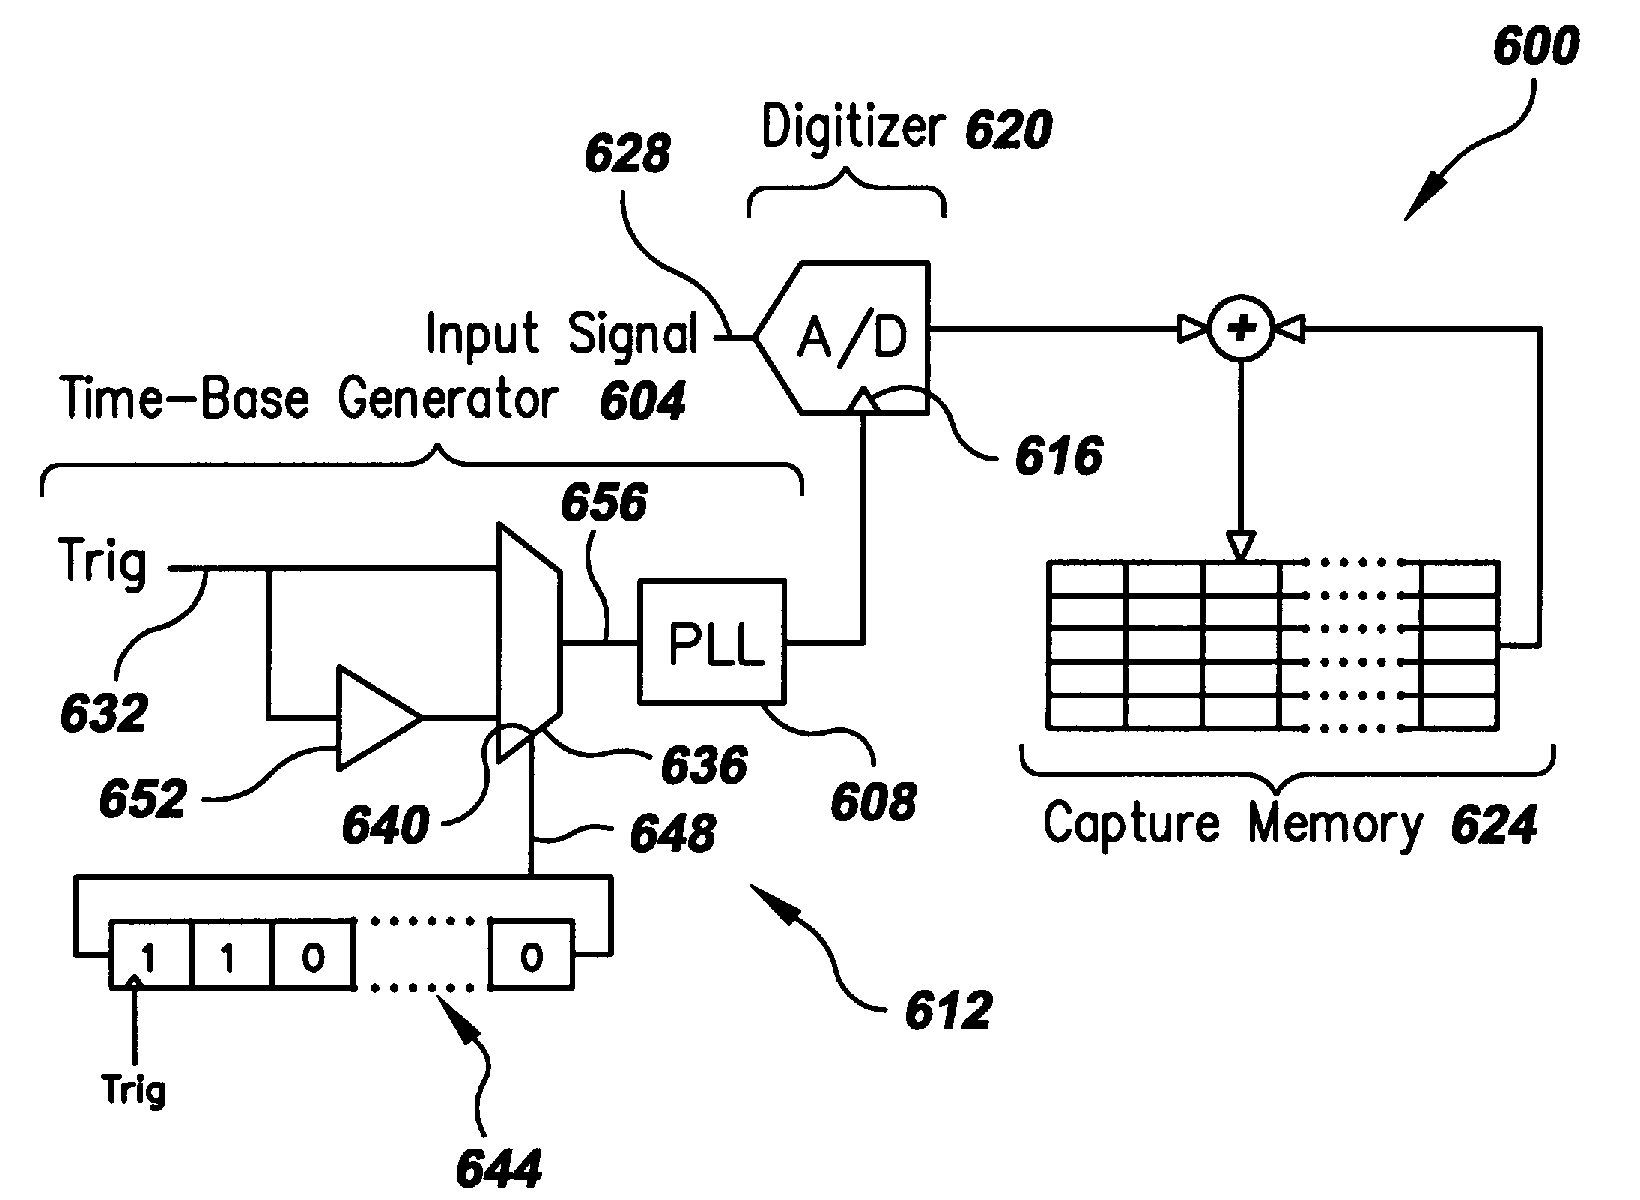 Signal Integrity Measurement Systems and Methods Using a Predominantly Digital Time-Base Generator